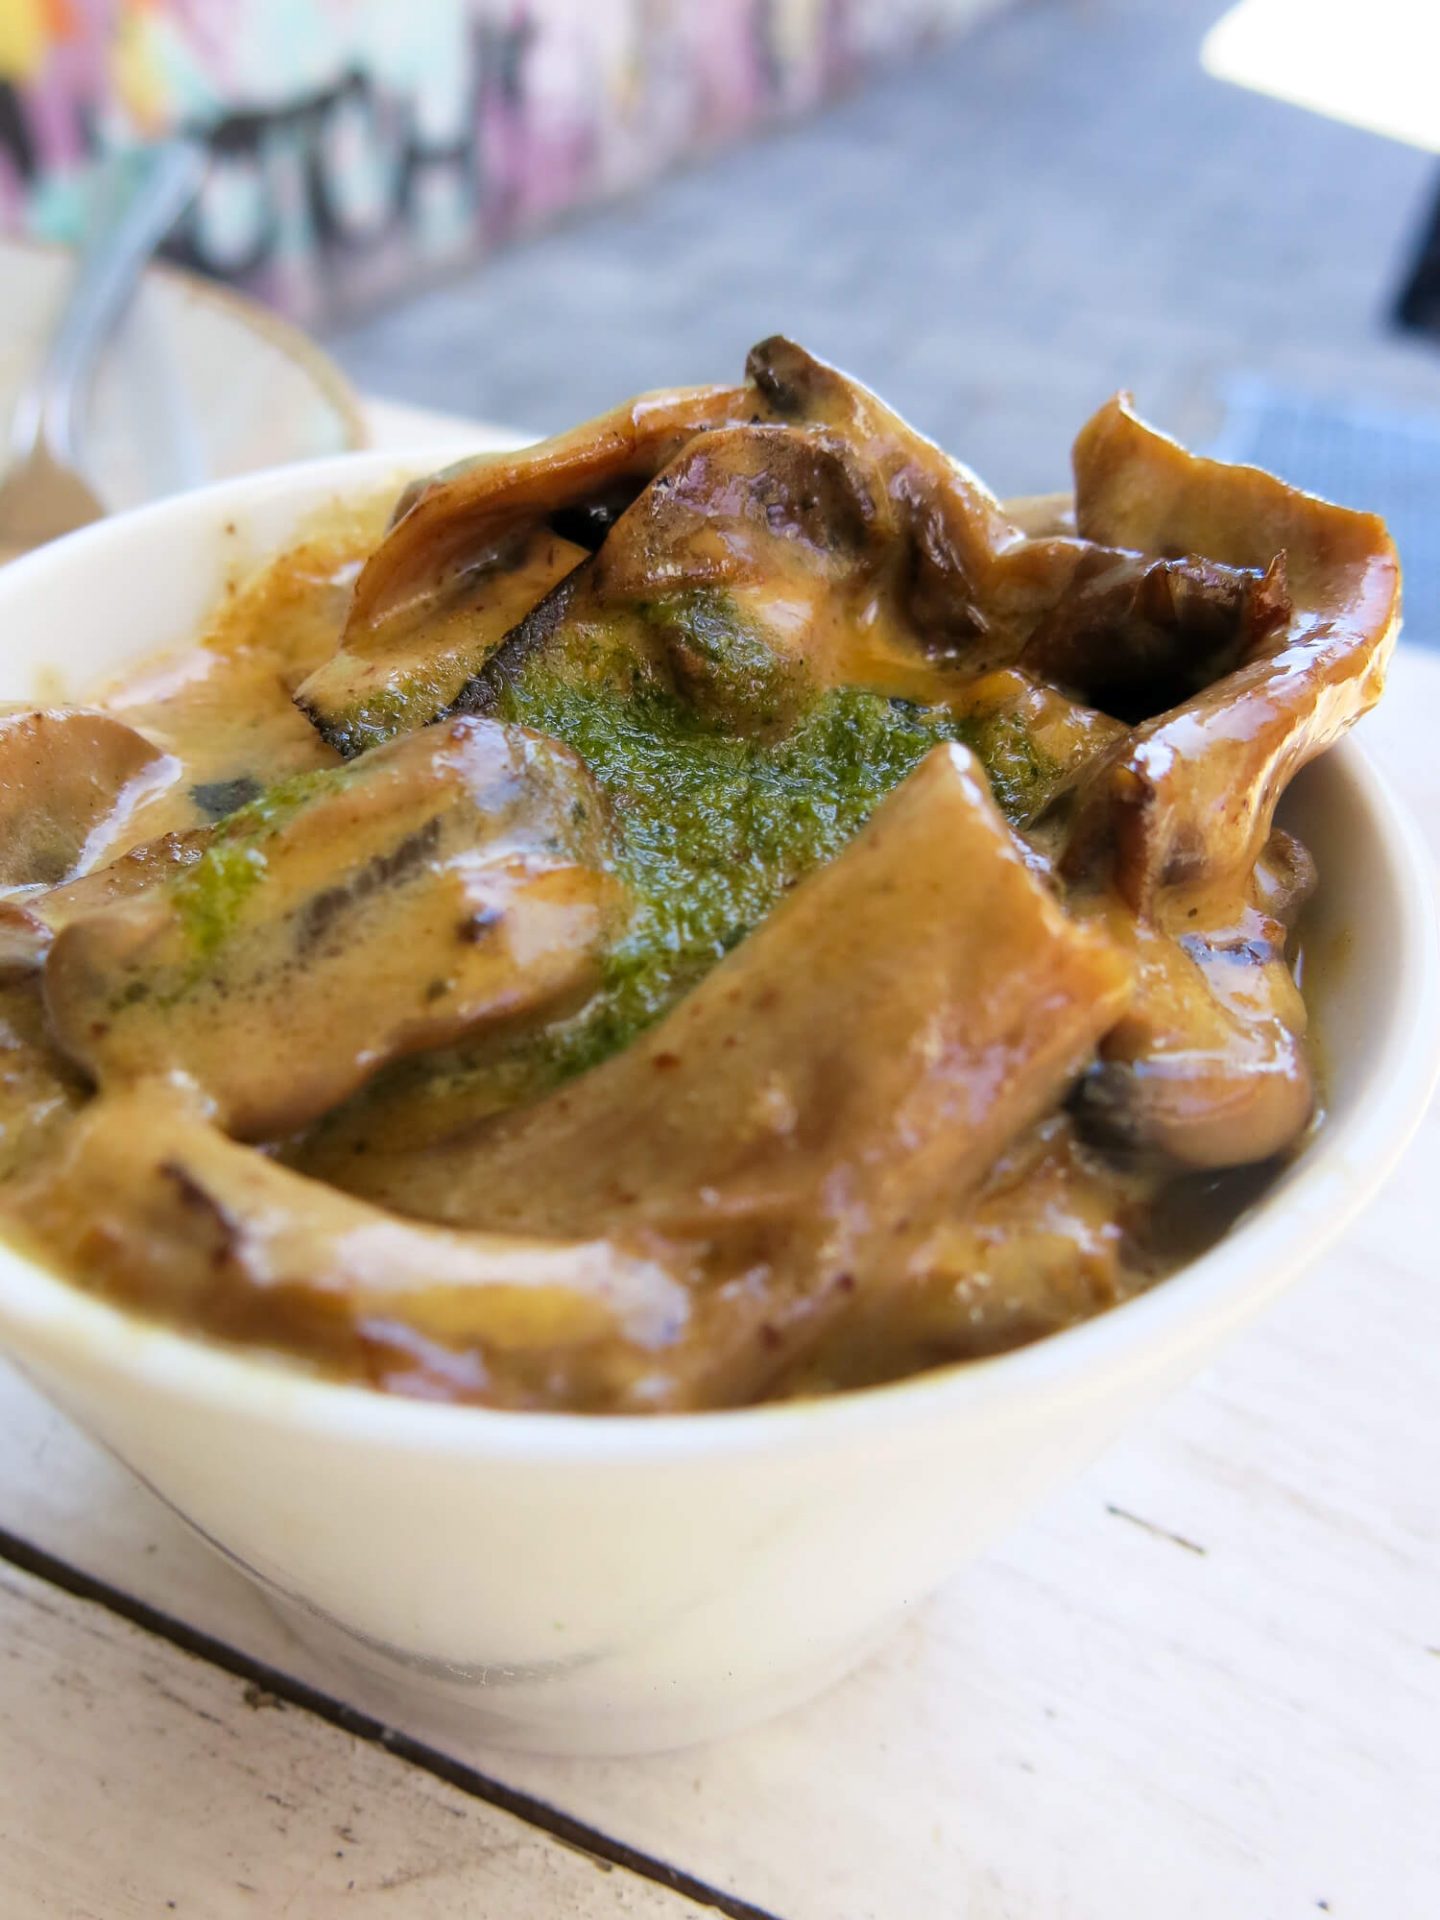 The creamy pesto mushrooms at Tupi. A great place for brunch in Peckham!